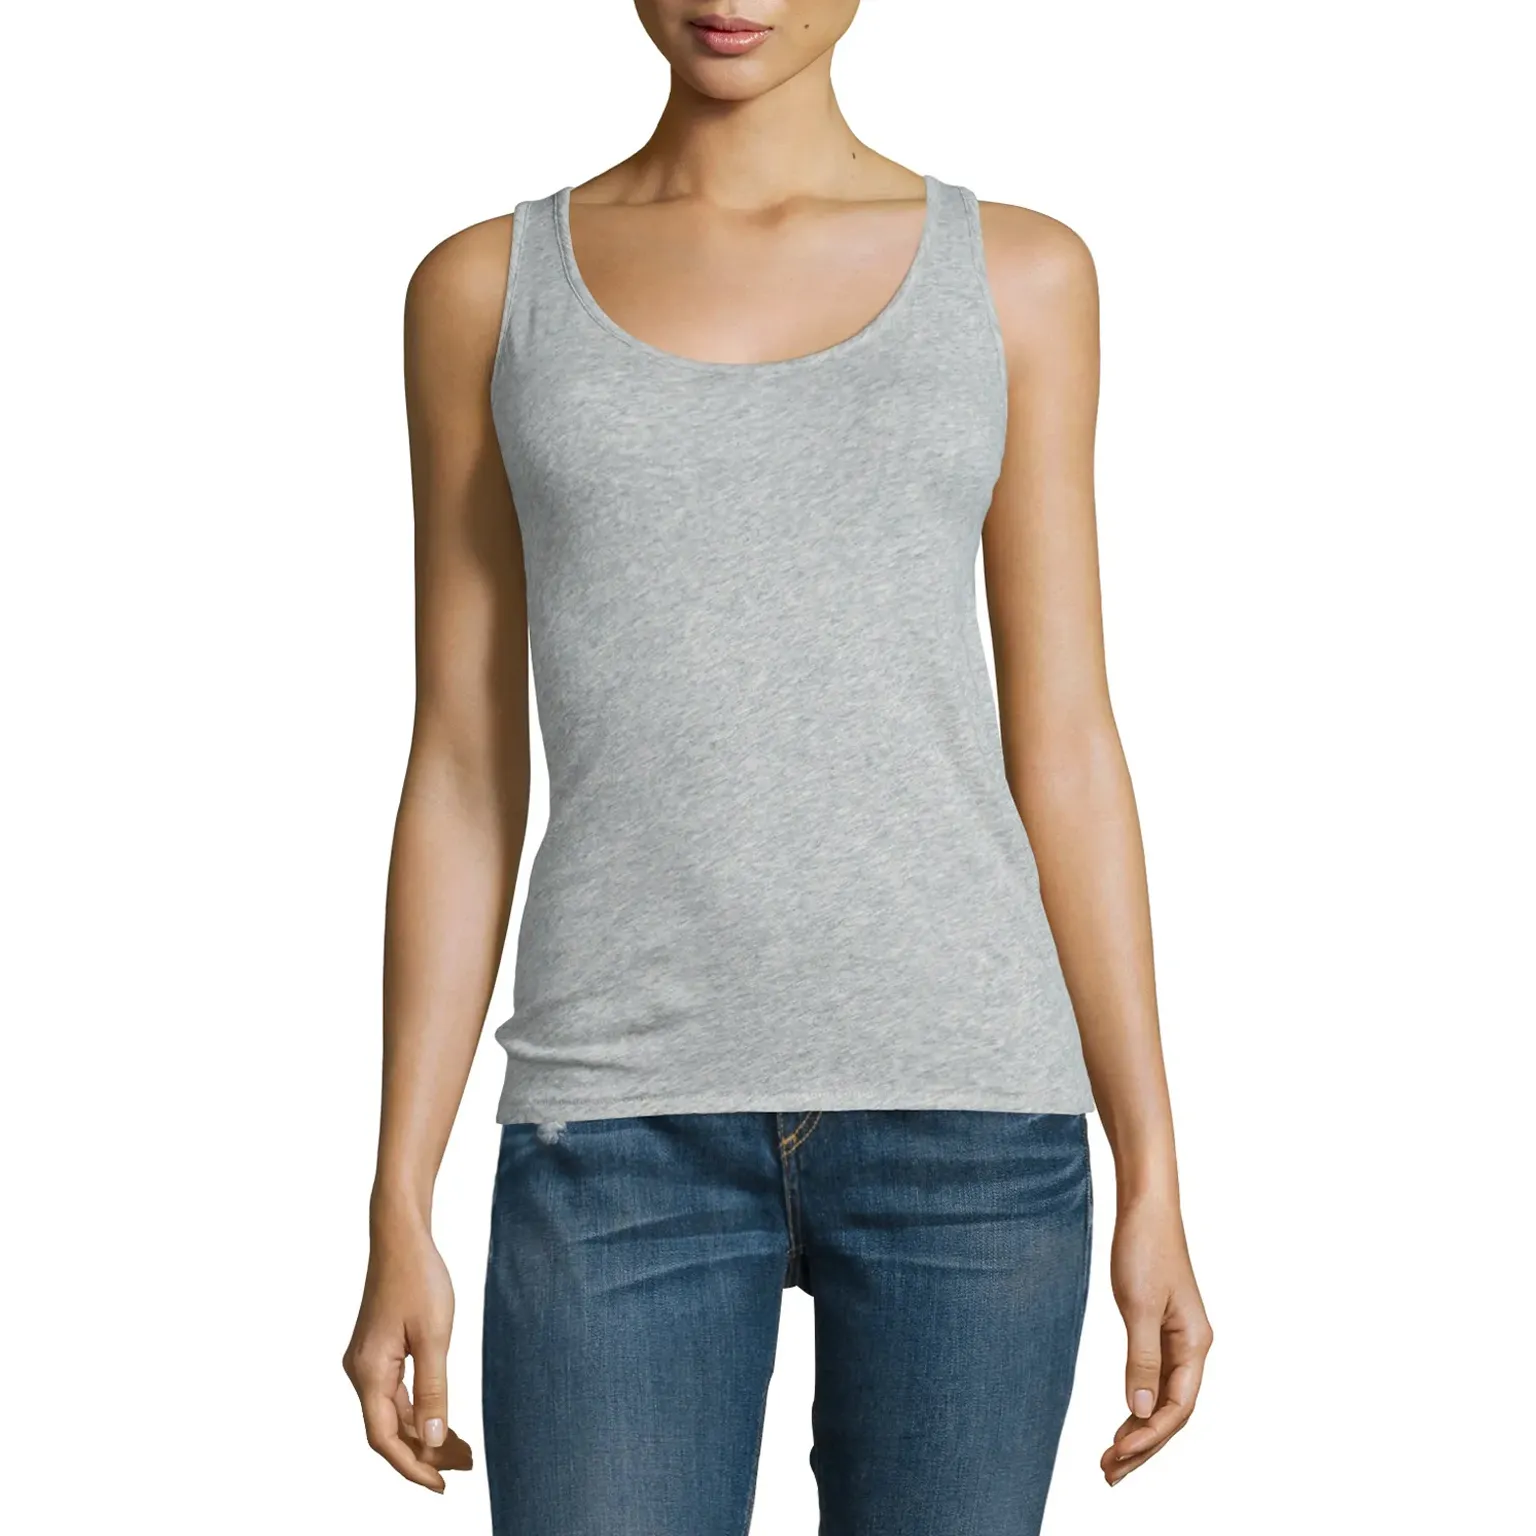 Cotton Tank Top manufacturing with trendy design